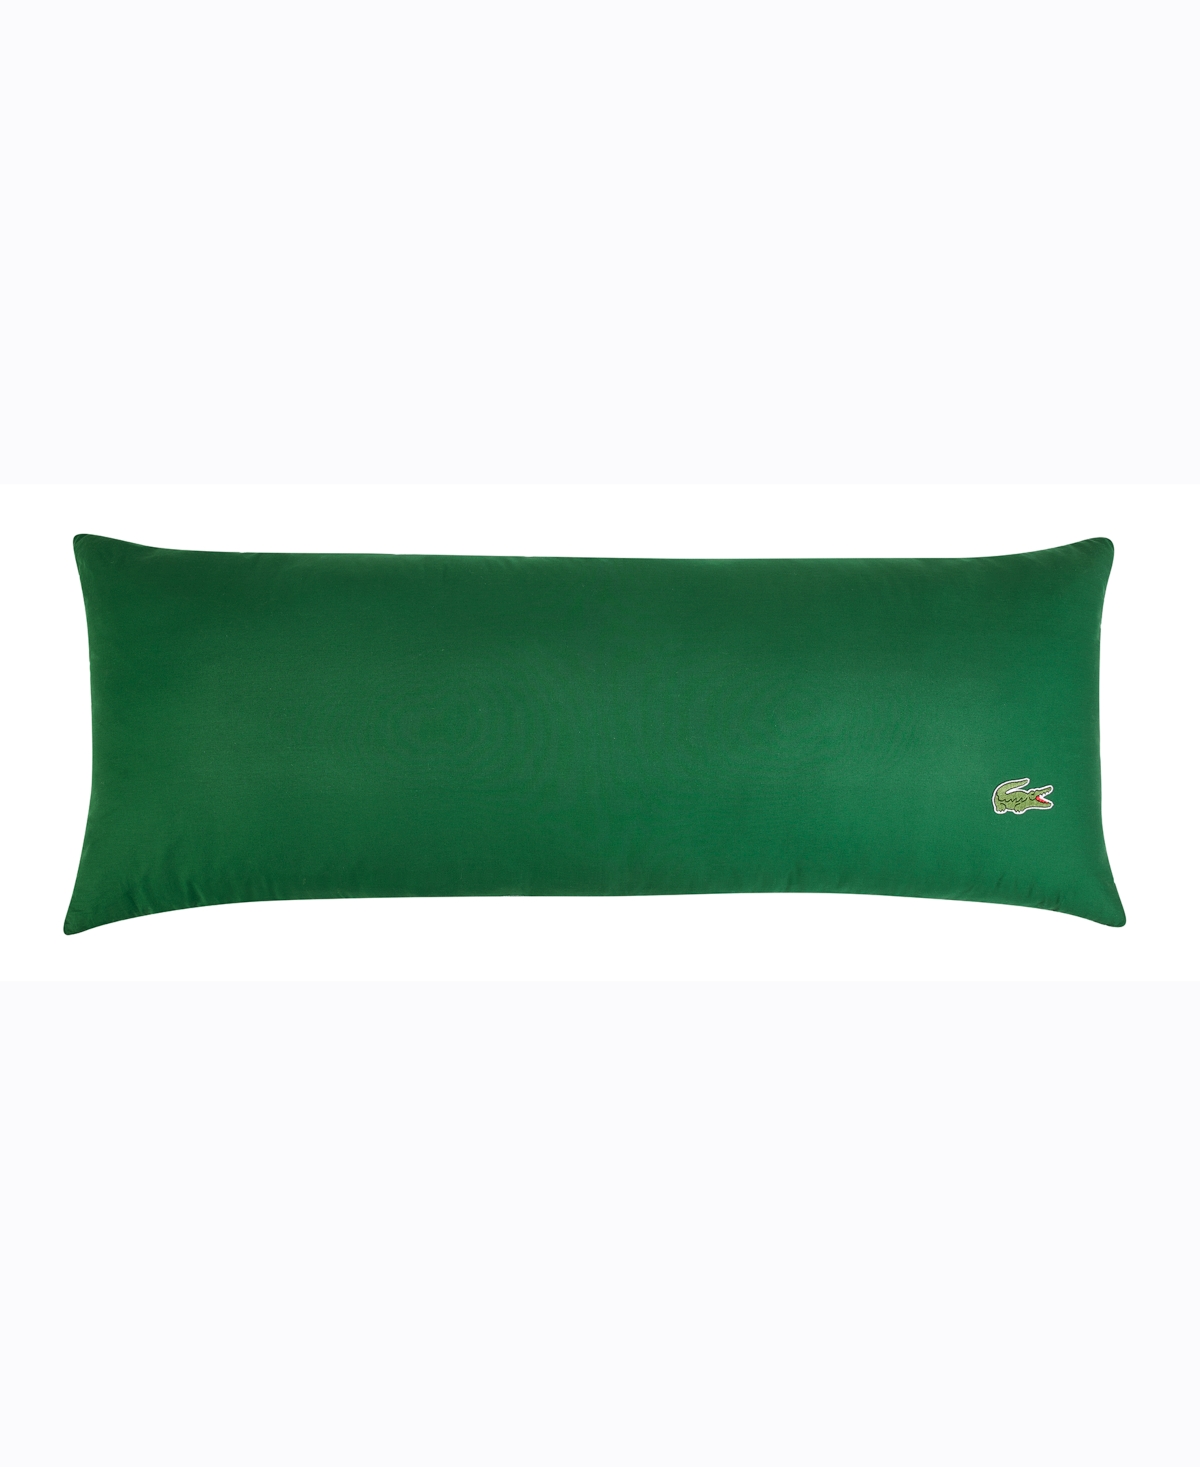 Lacoste Home Body Pillow Bedding In Green